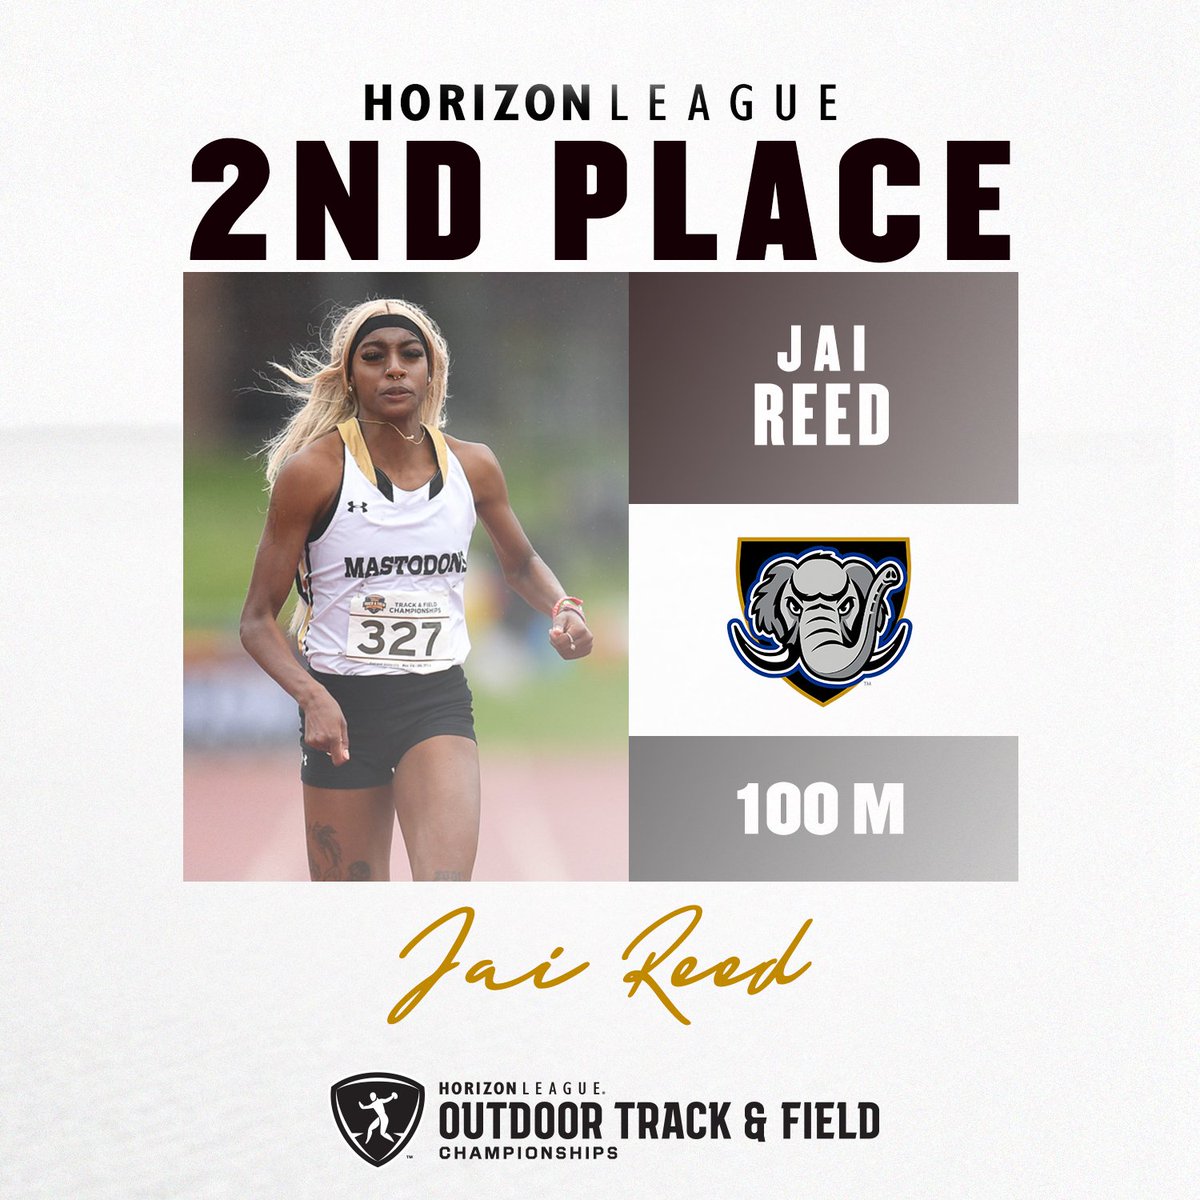 A time of 11.80 in the 100 gives Jai Reed a 🥈 place finish!

#FeelTheRumble #HLTF